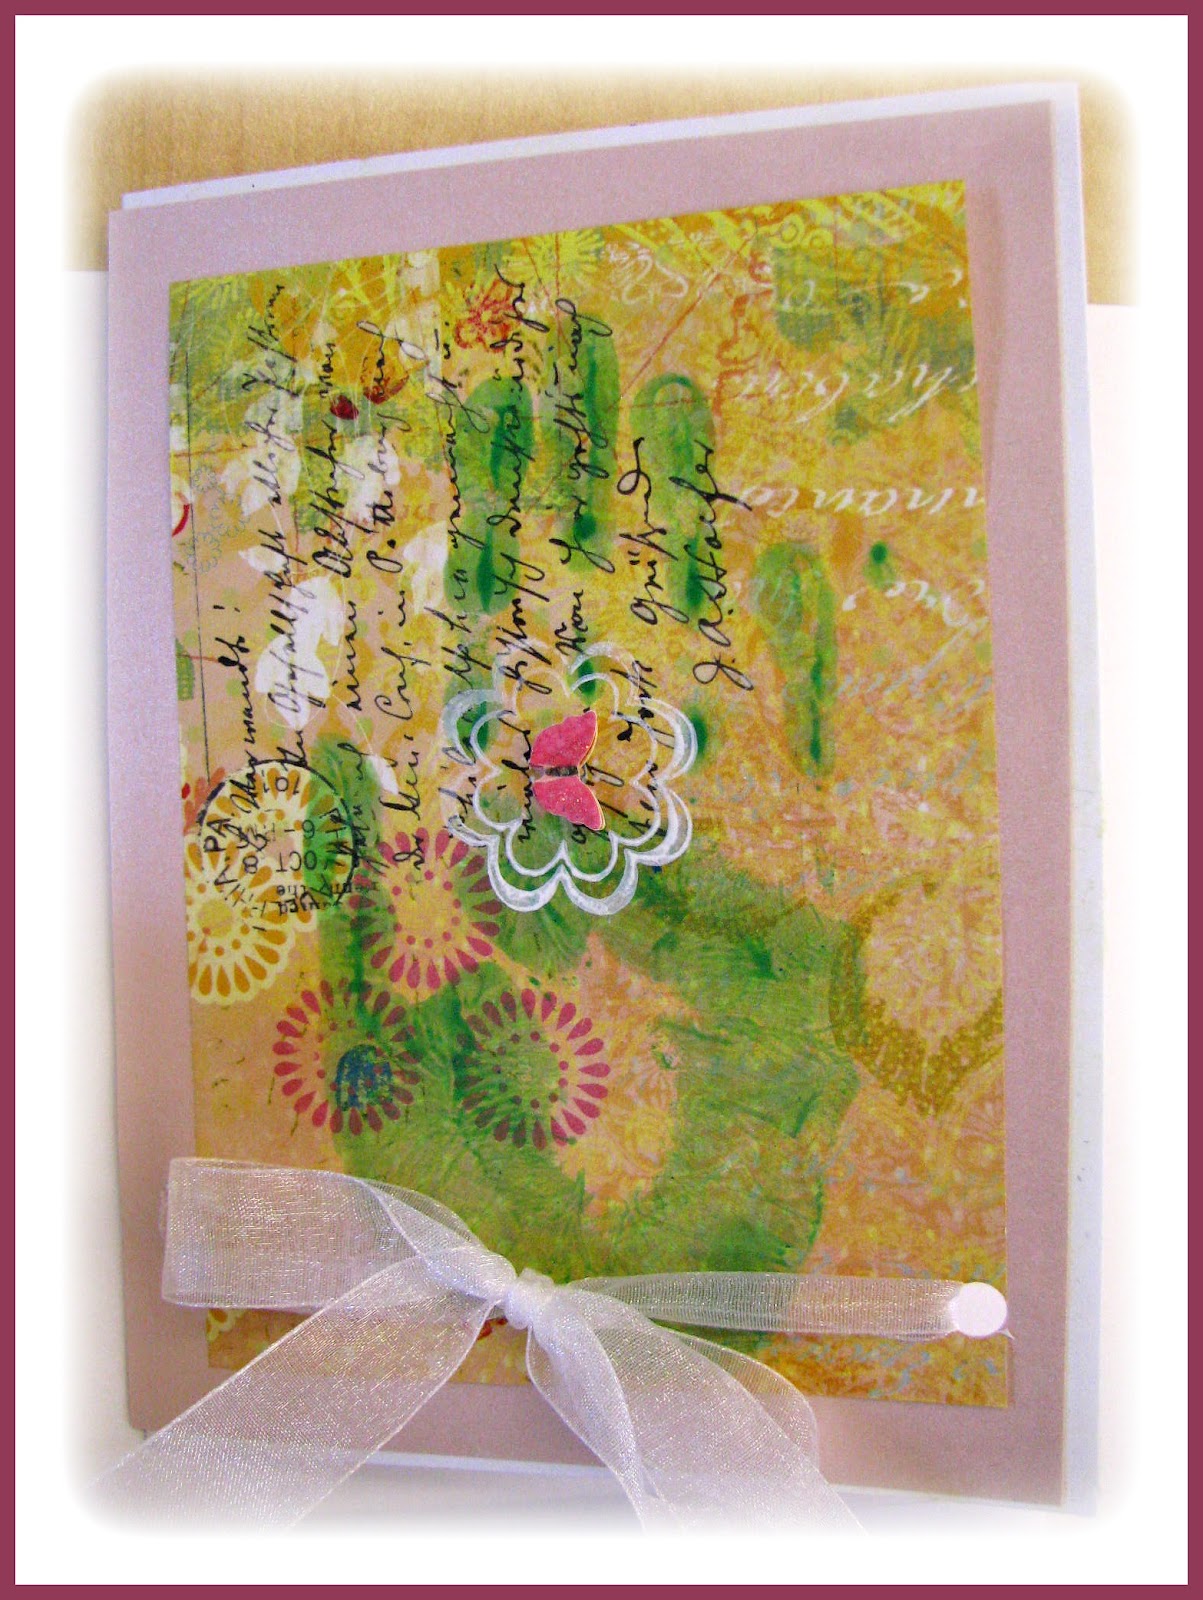 PLATEAU ART STUDIO: Mother's Day Pop Up Cards